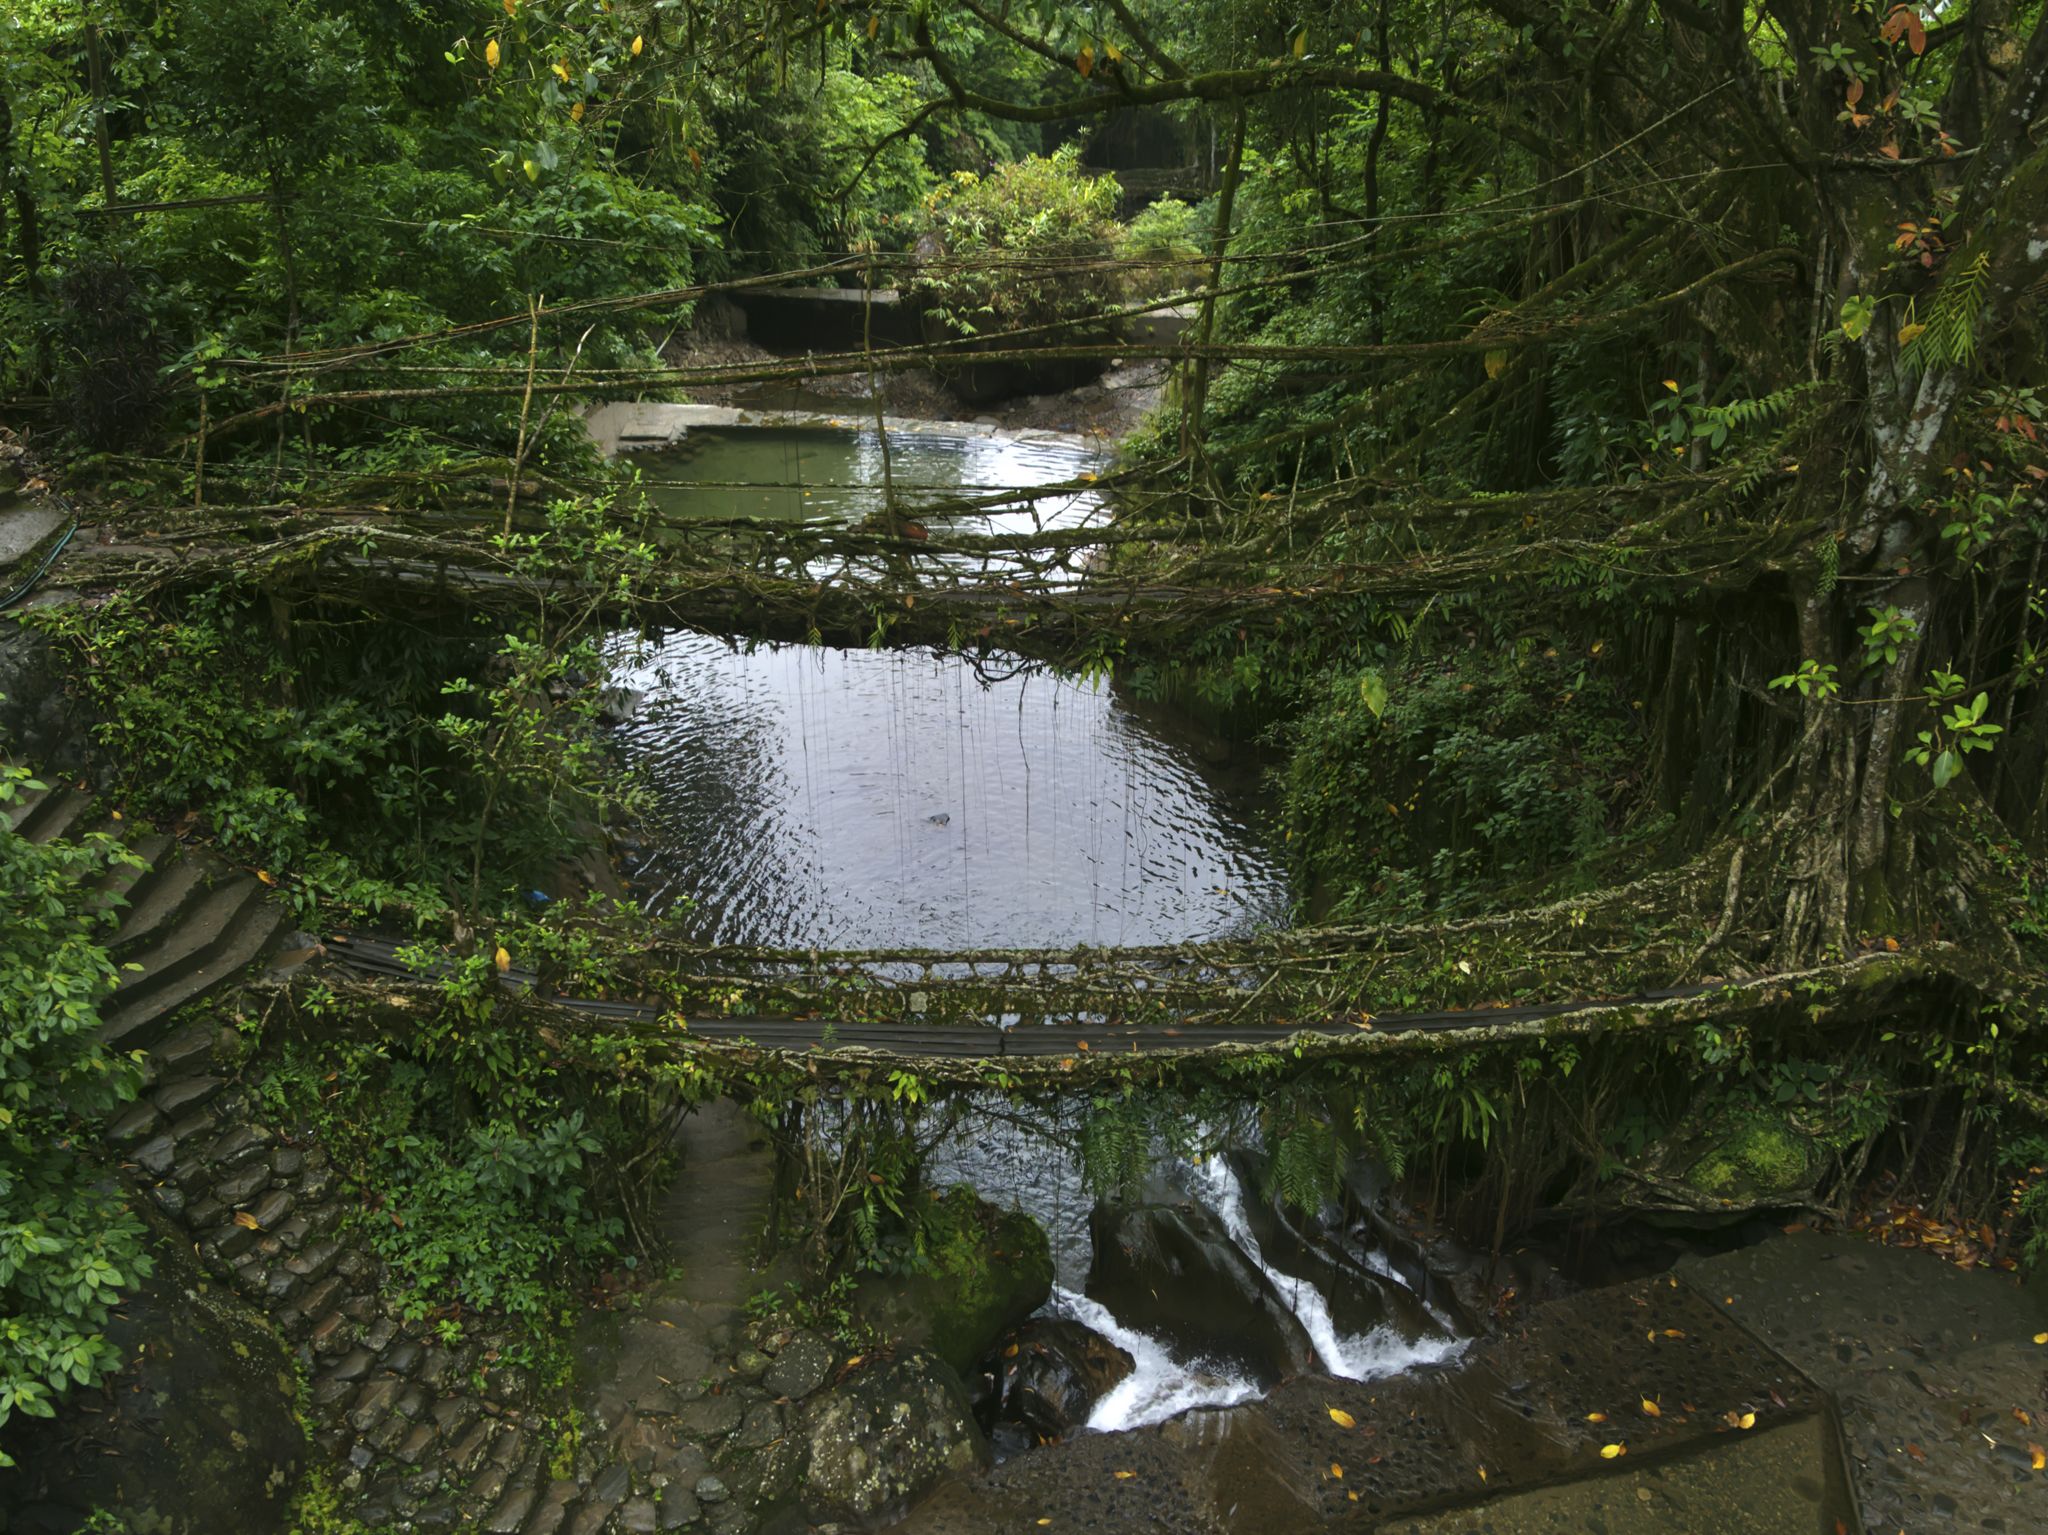 The double decker root bridges. This image is from India from Above. [Photo of the day - December 2020]